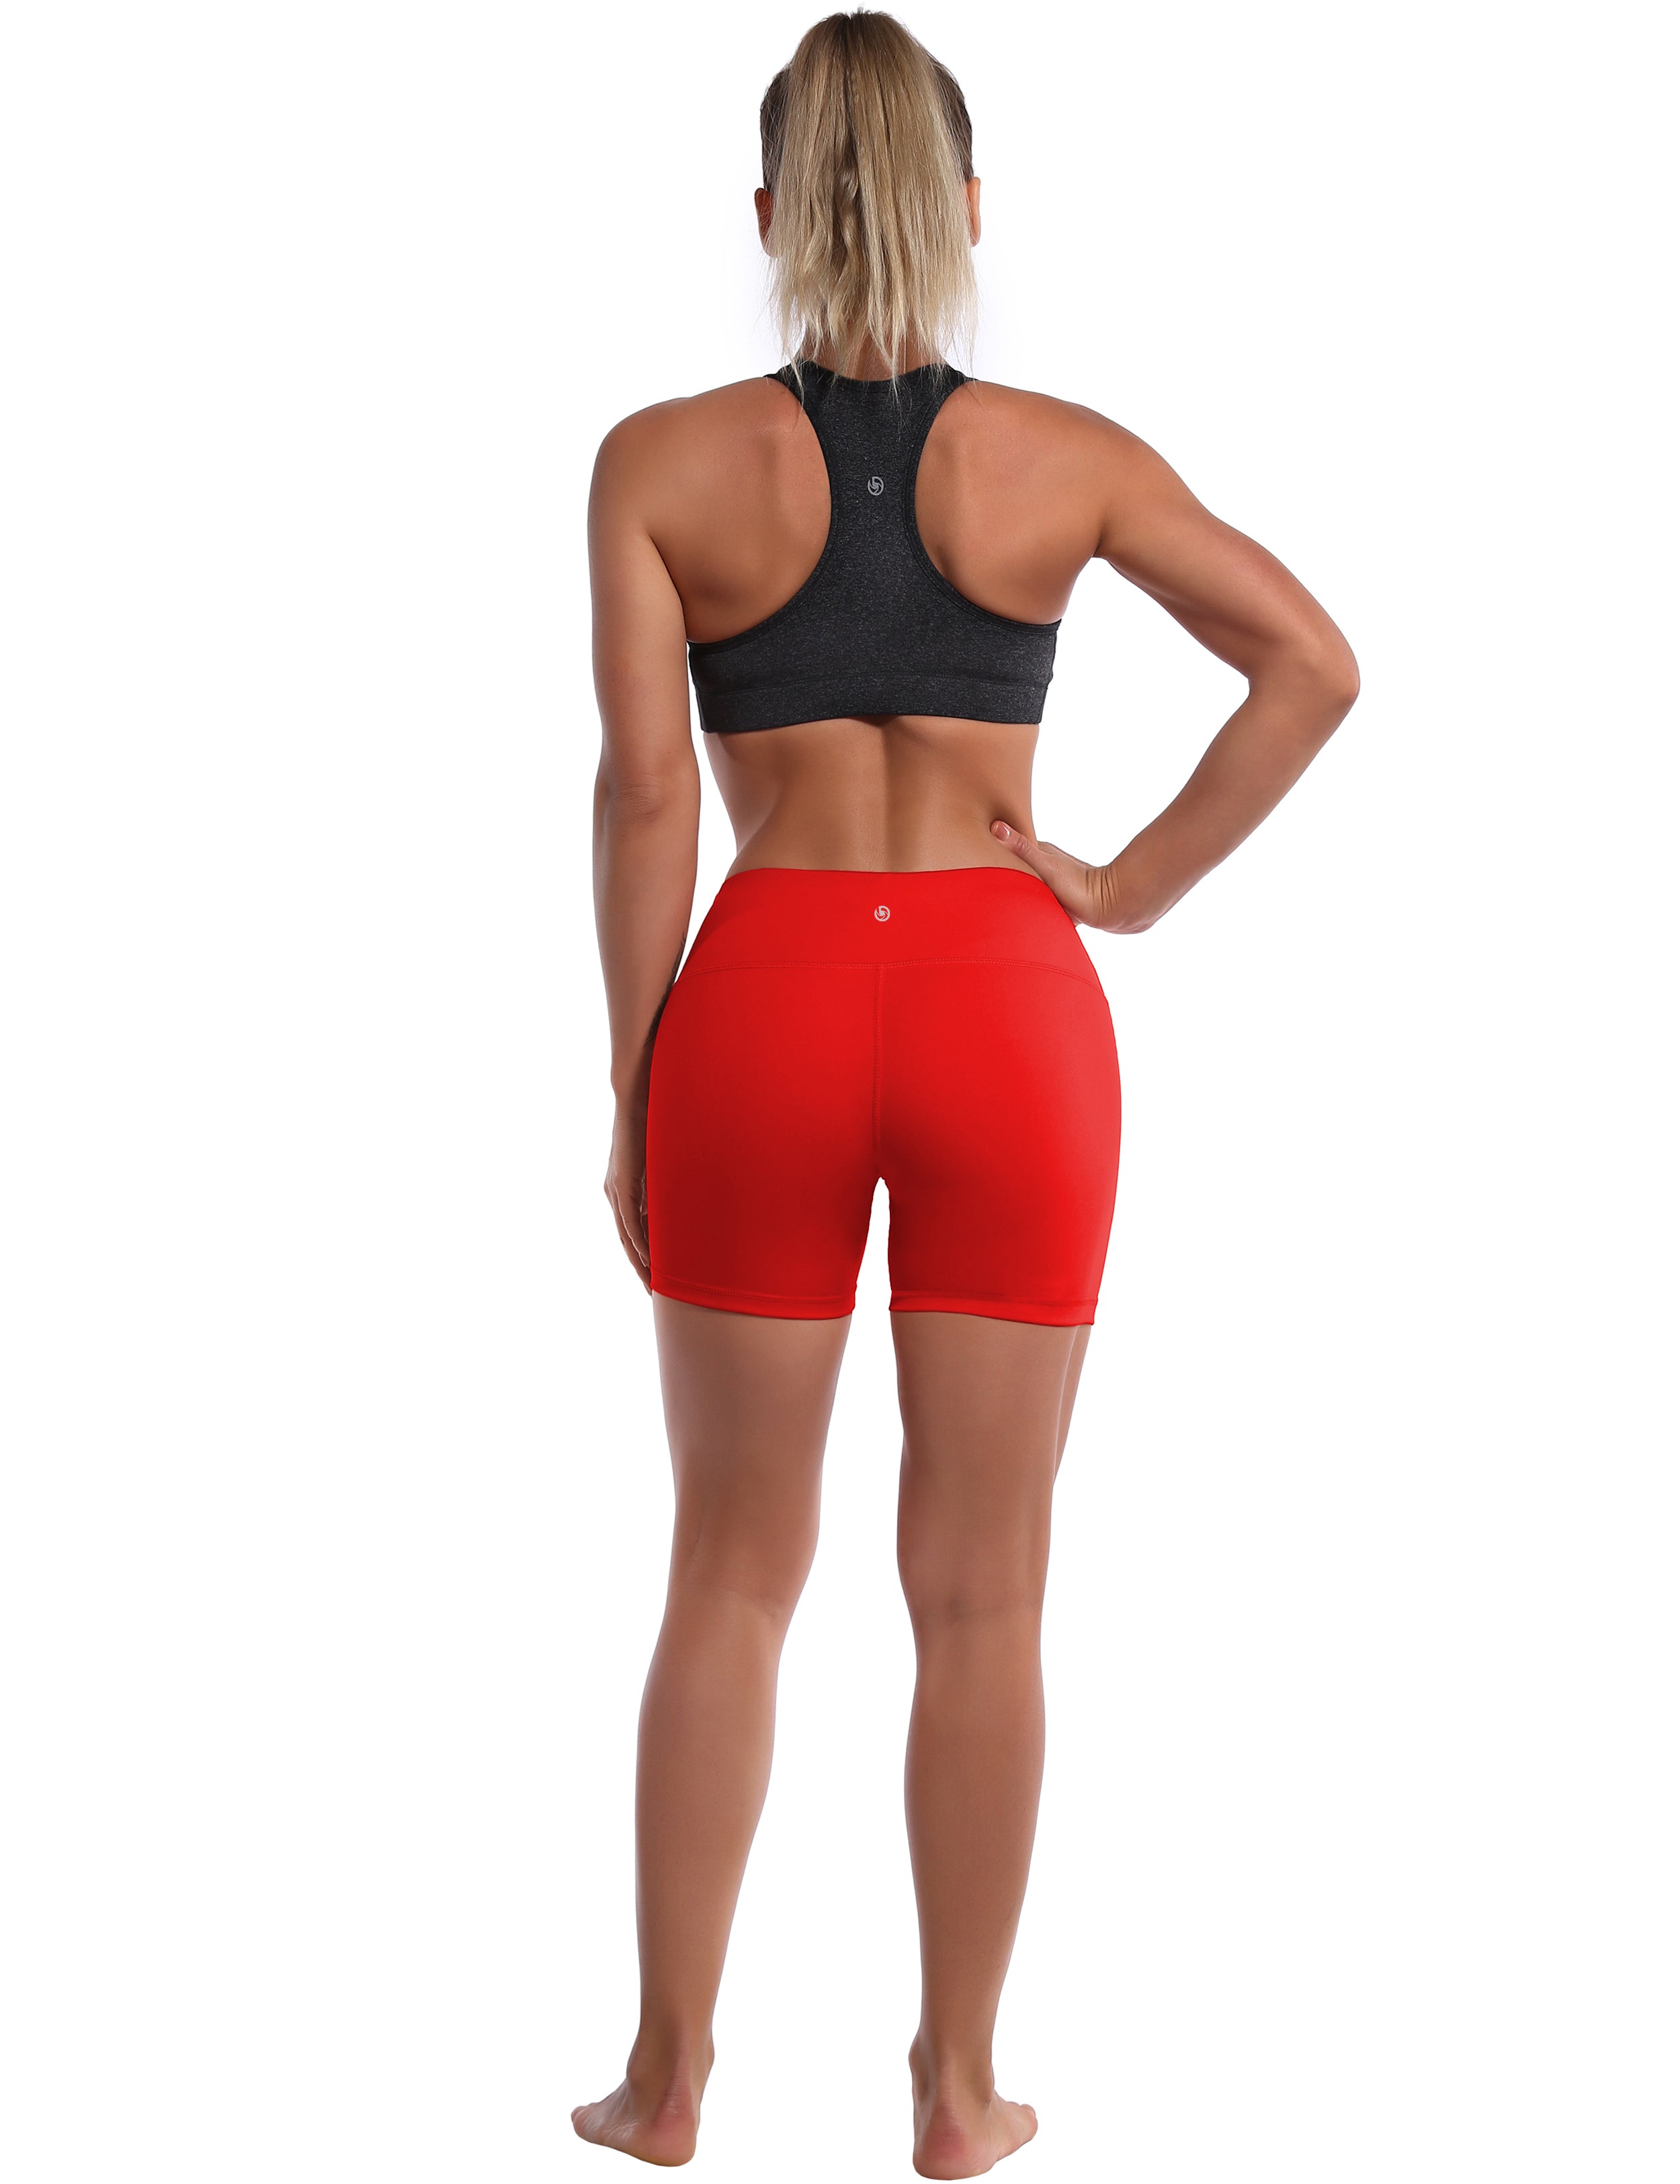 4" Yoga Shorts scarlet Sleek, soft, smooth and totally comfortable: our newest style is here. Softest-ever fabric High elasticity High density 4-way stretch Fabric doesn't attract lint easily No see-through Moisture-wicking Machine wash 75% Nylon, 25% Spandex